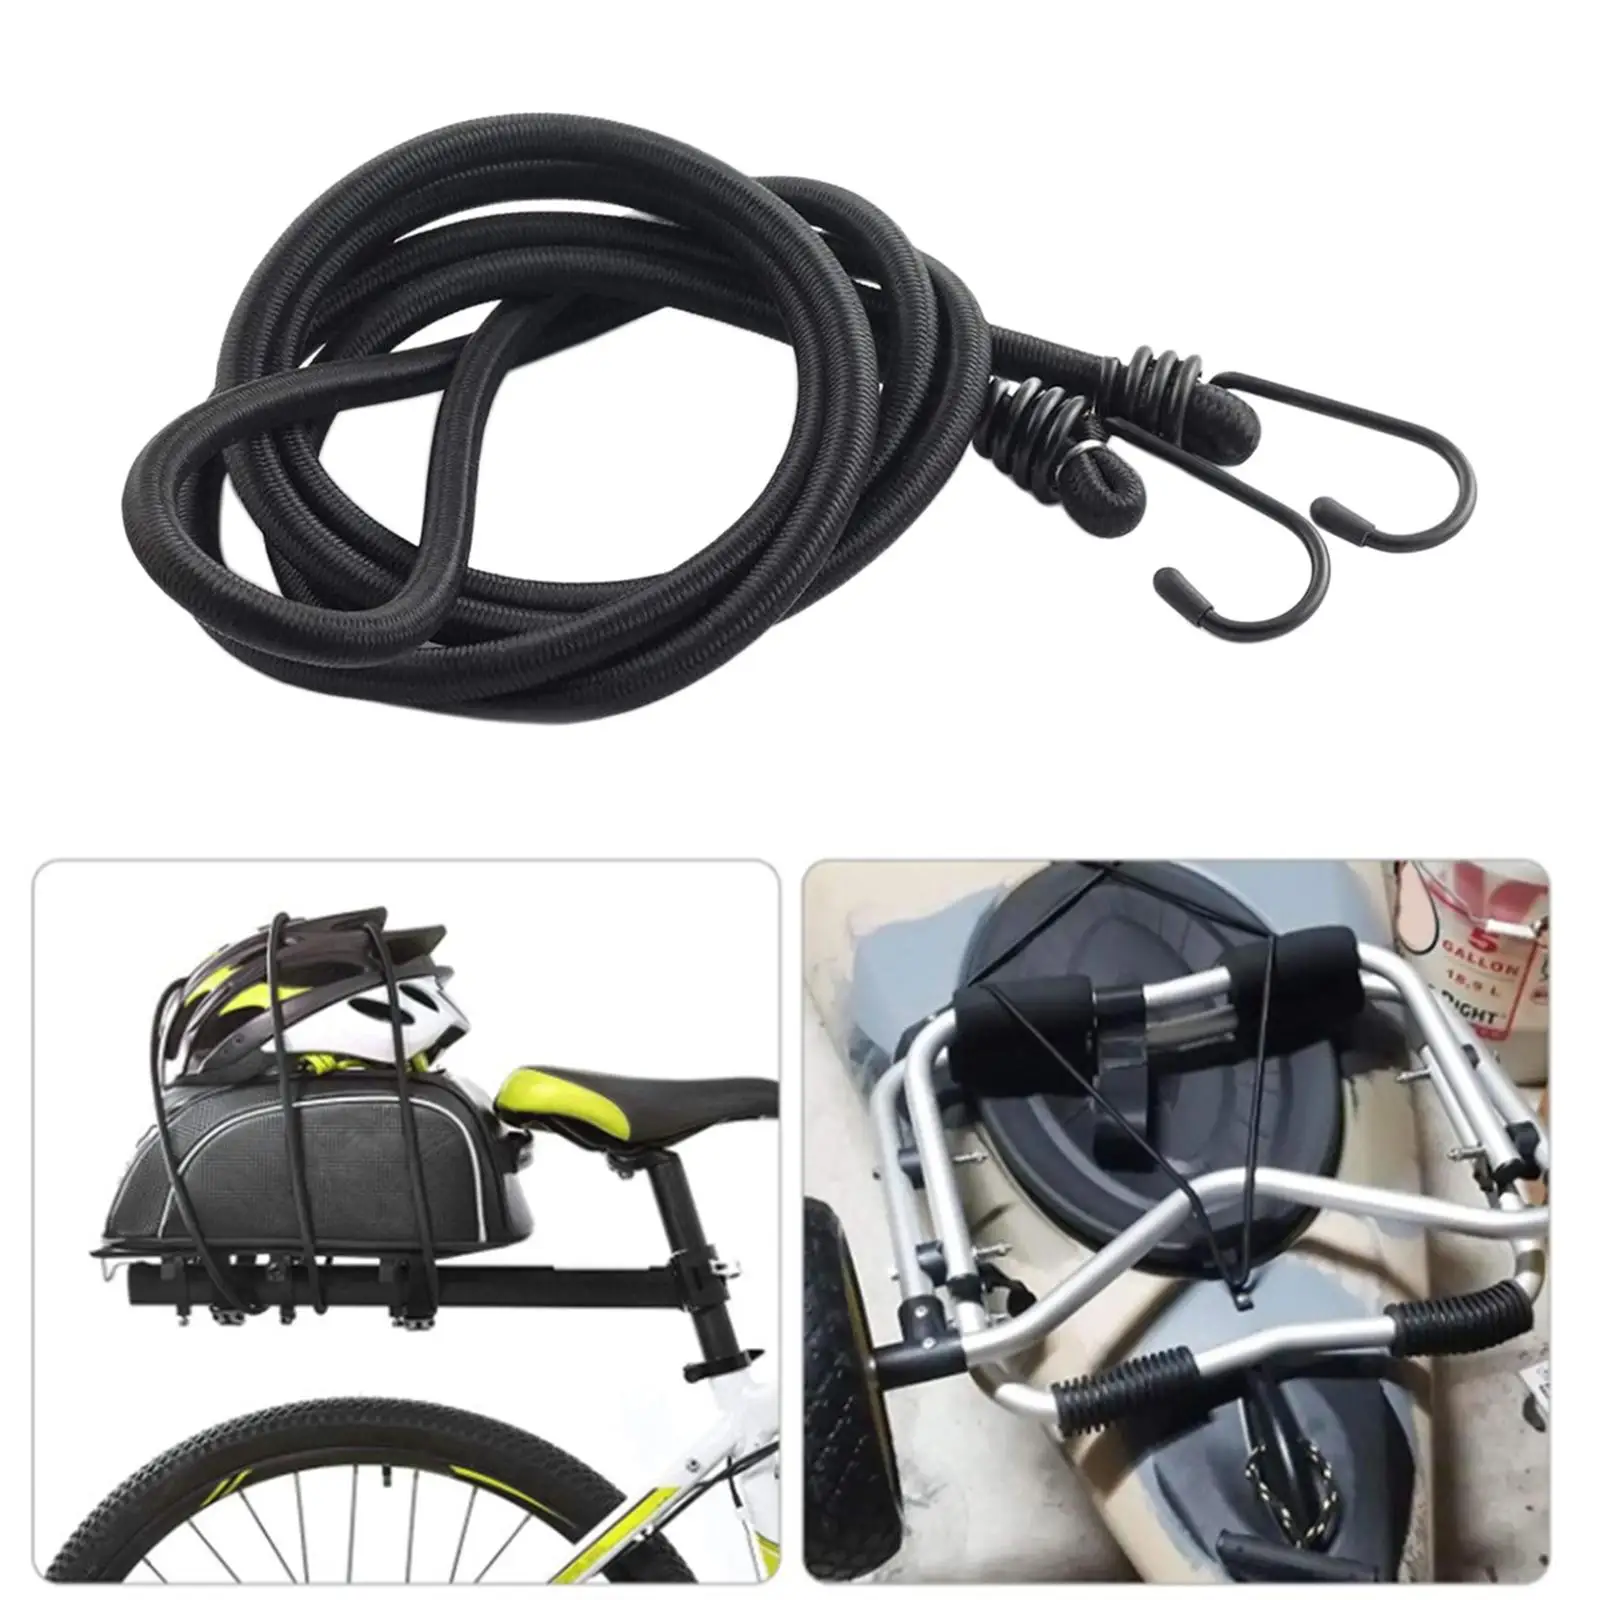 Bike Long Bungee Cords Rope with Hooks Straps Elastic Tie Down Fixed Band